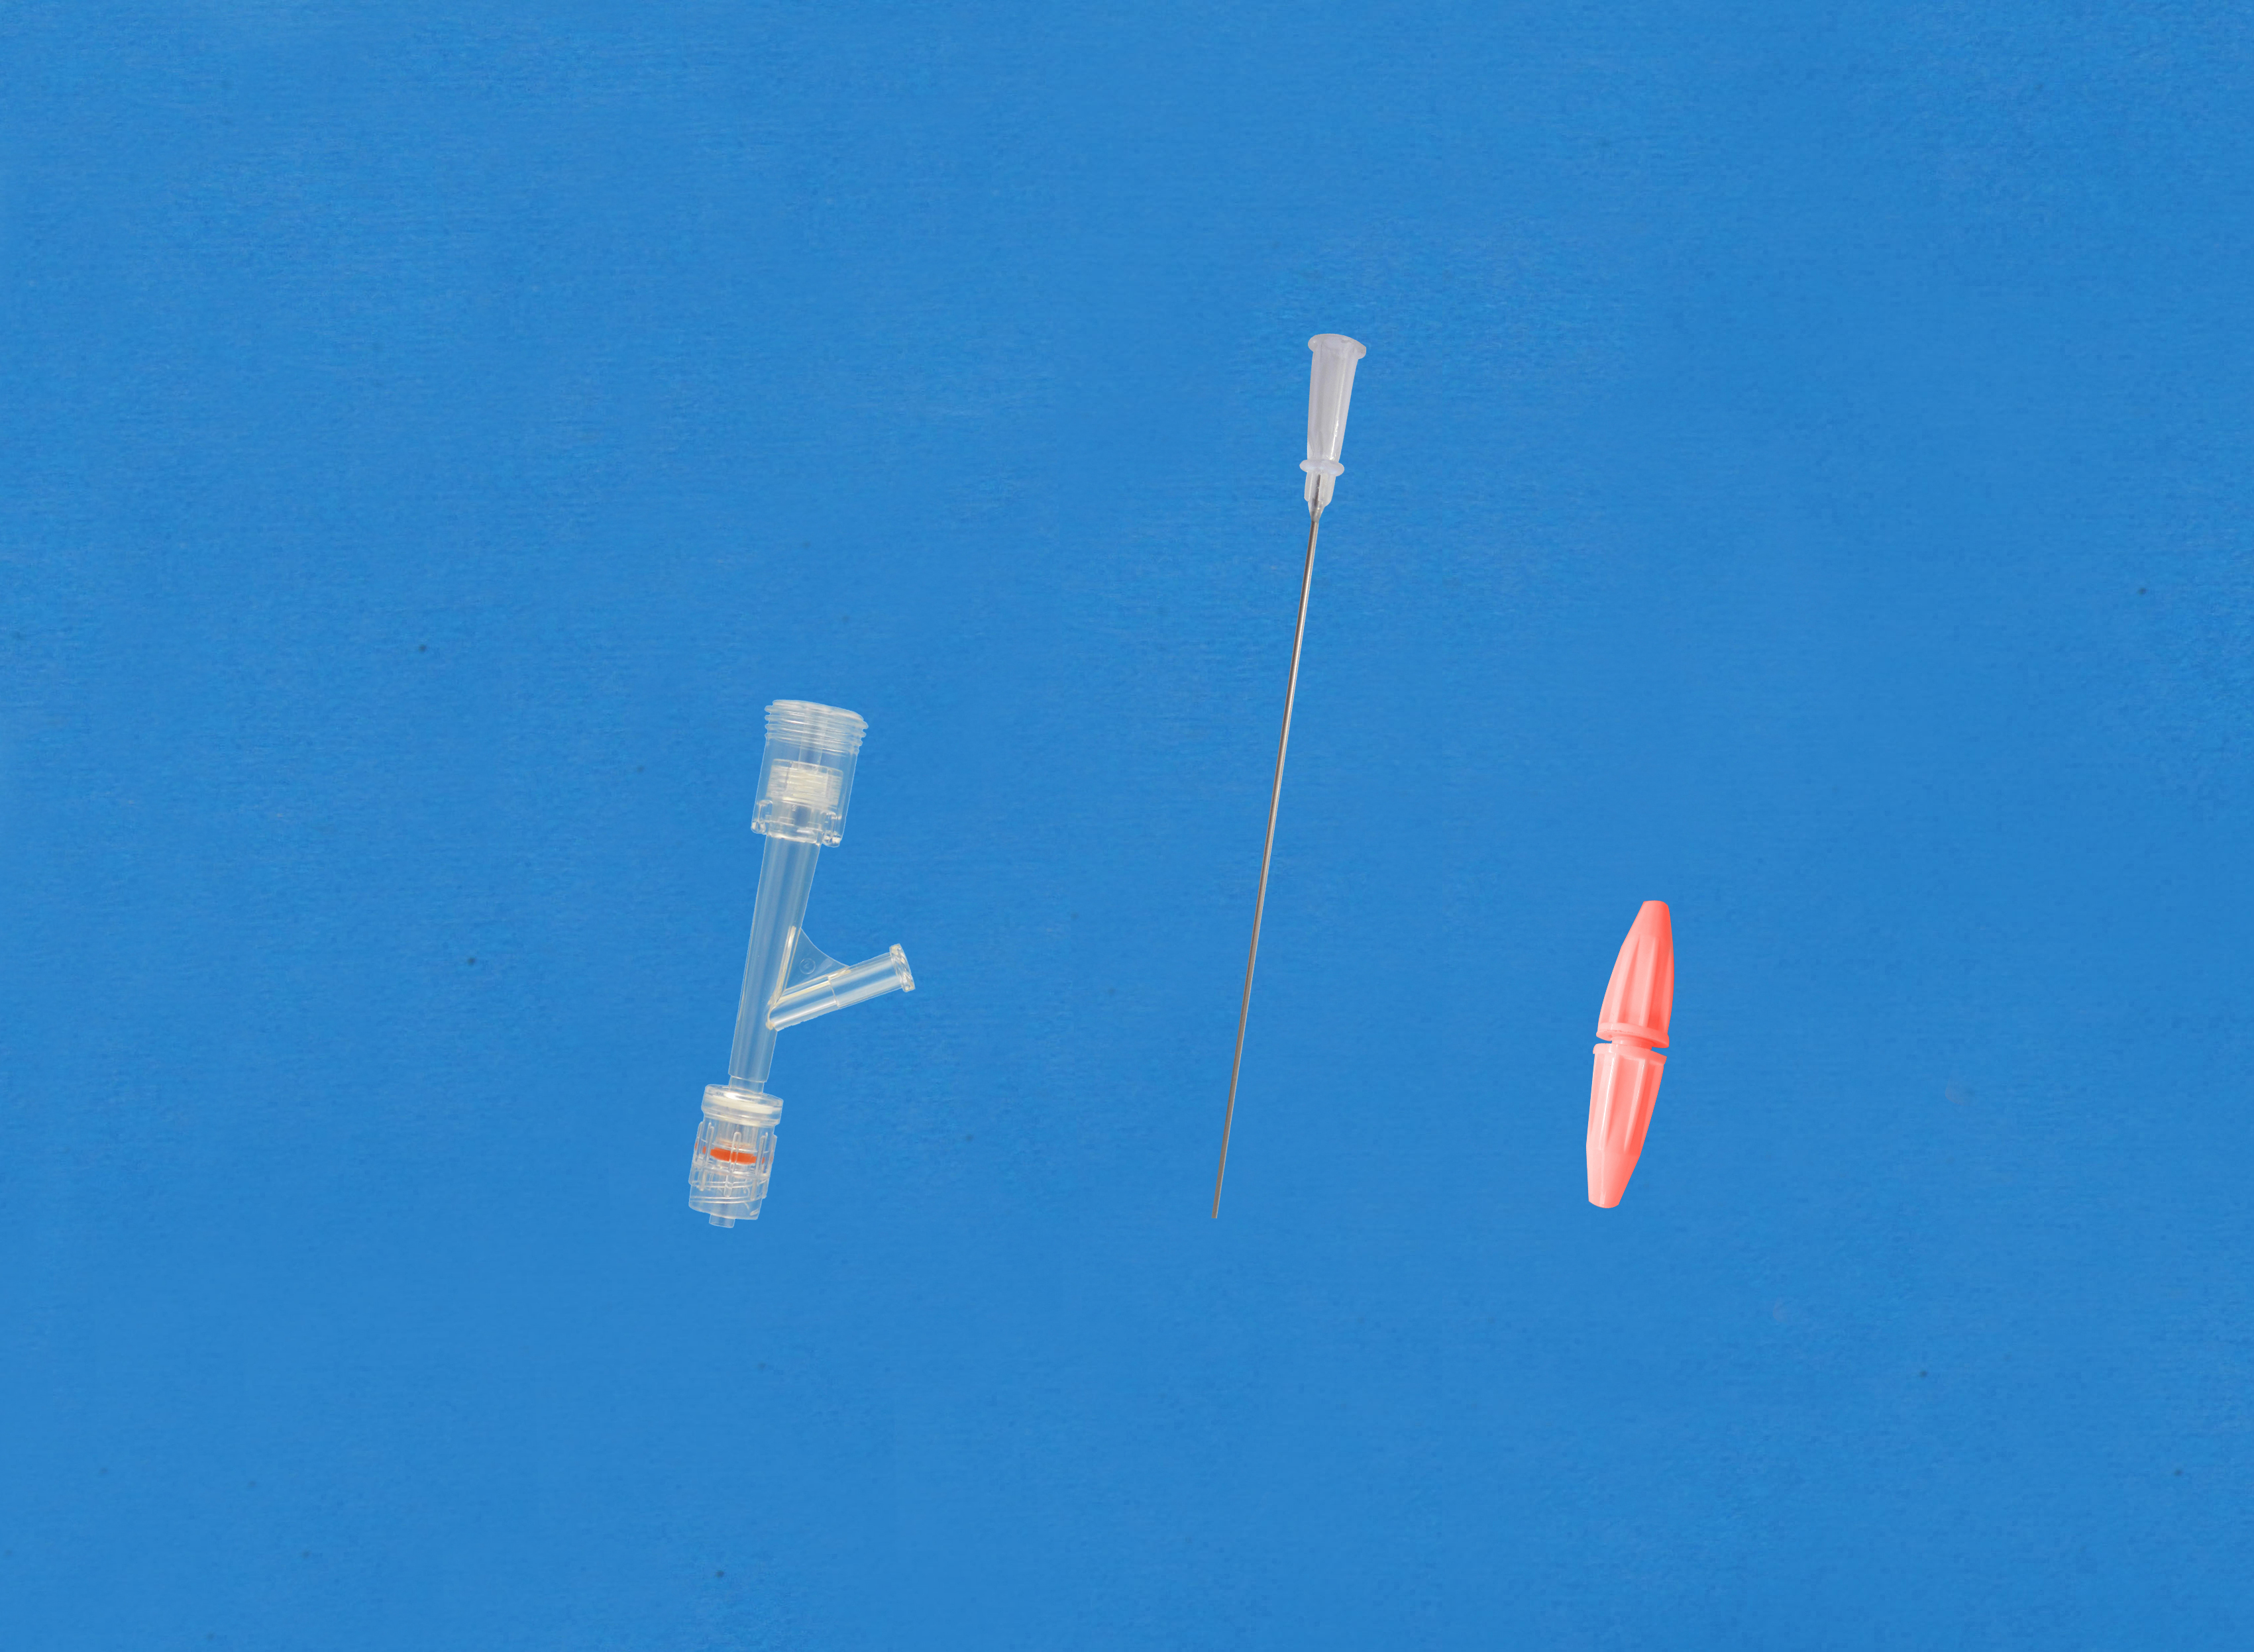 Haemostatic valves, Push-pull, Sideon Female Luer, Insertion Tool with Small Hub, Red/Plastic Torquer